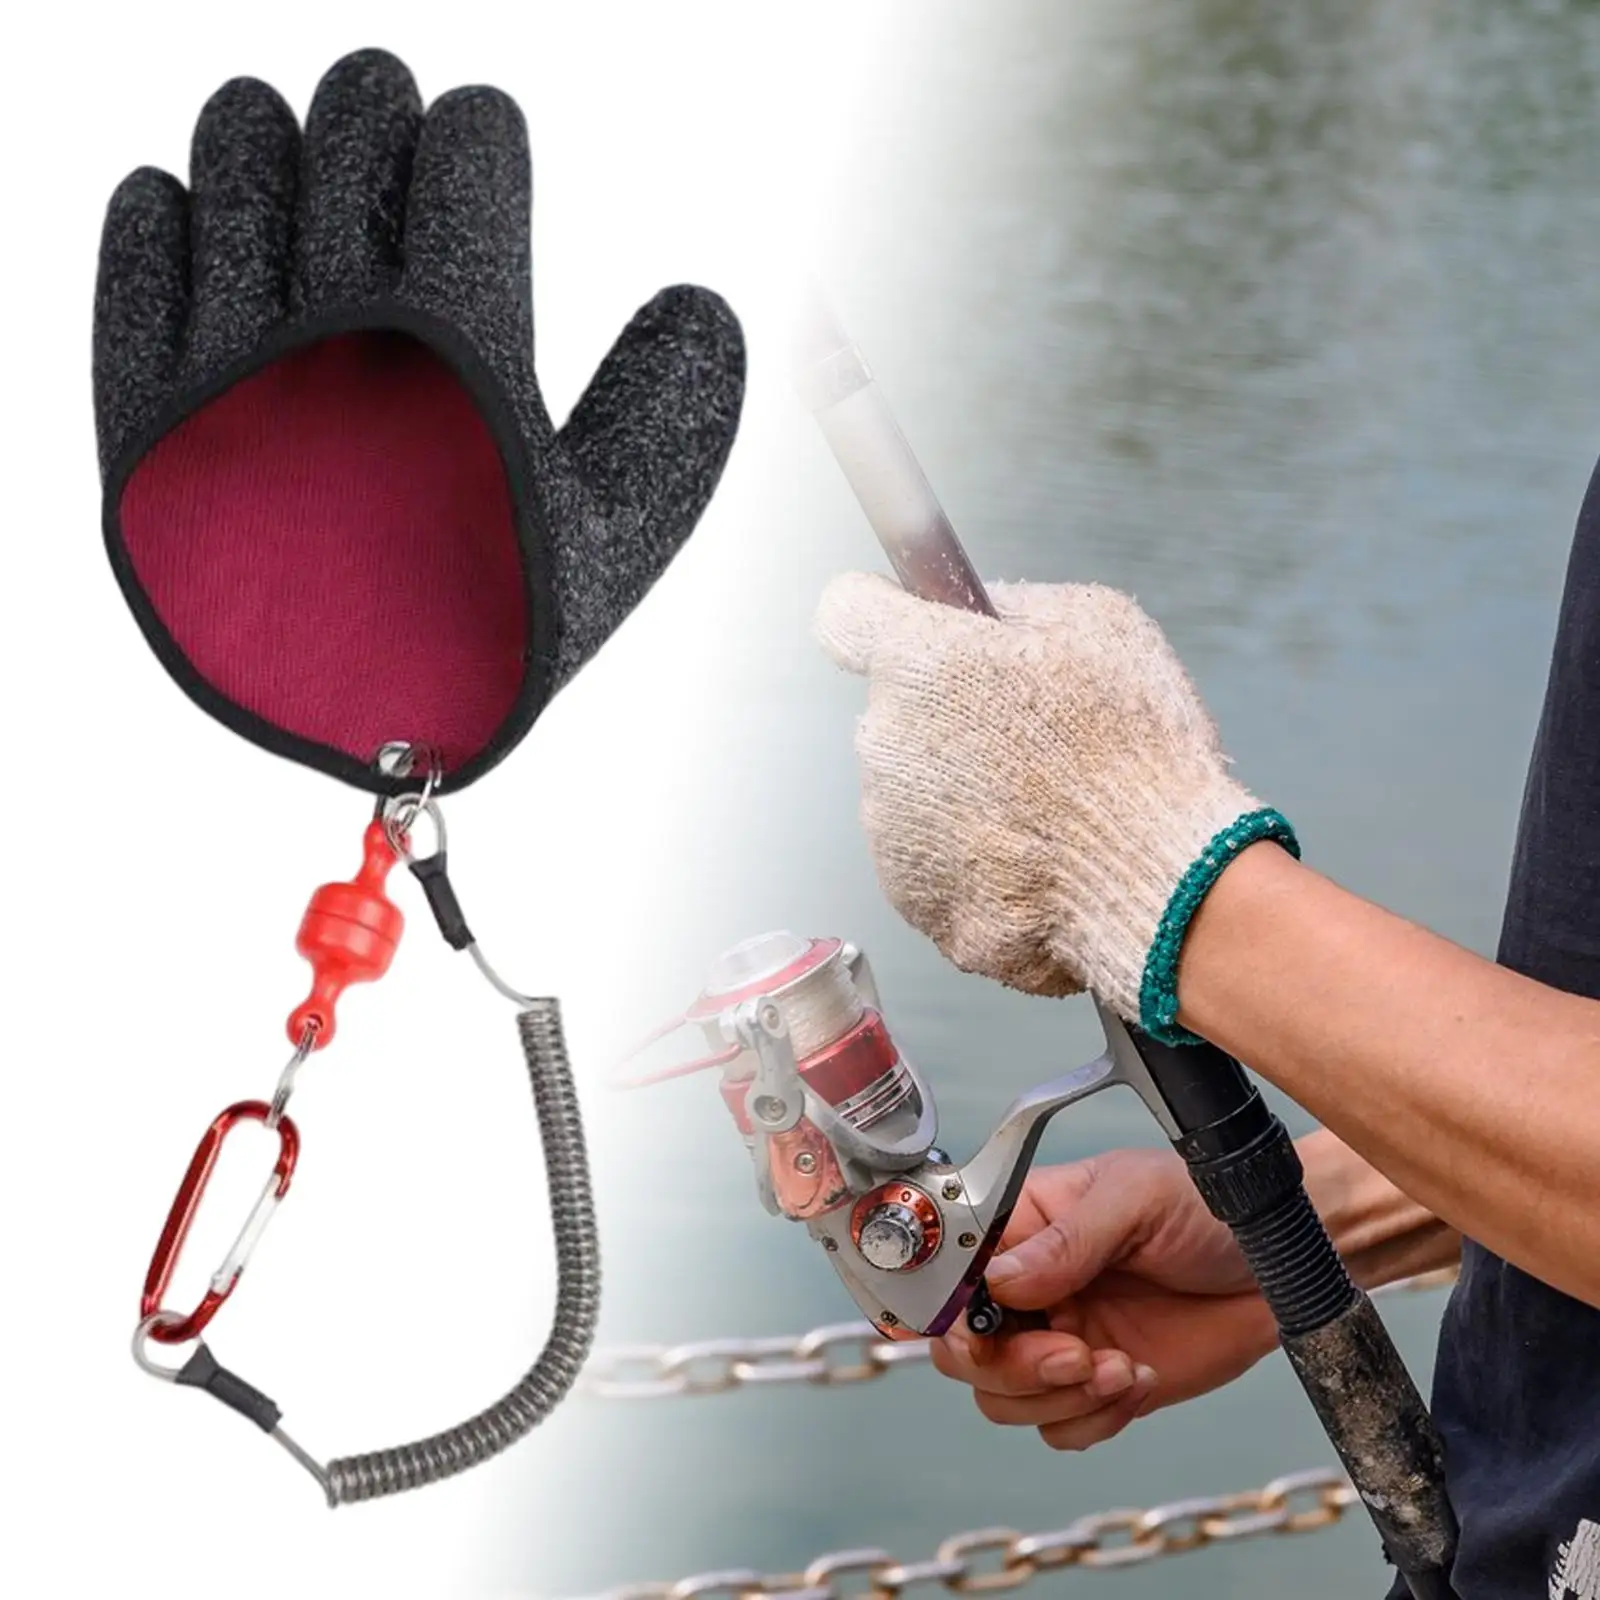 Fishing Gloves Nonslip Puncture Resistant Waterproof Fish Glove Cut Resistant for Handling Catch Fish Catching Fisherman